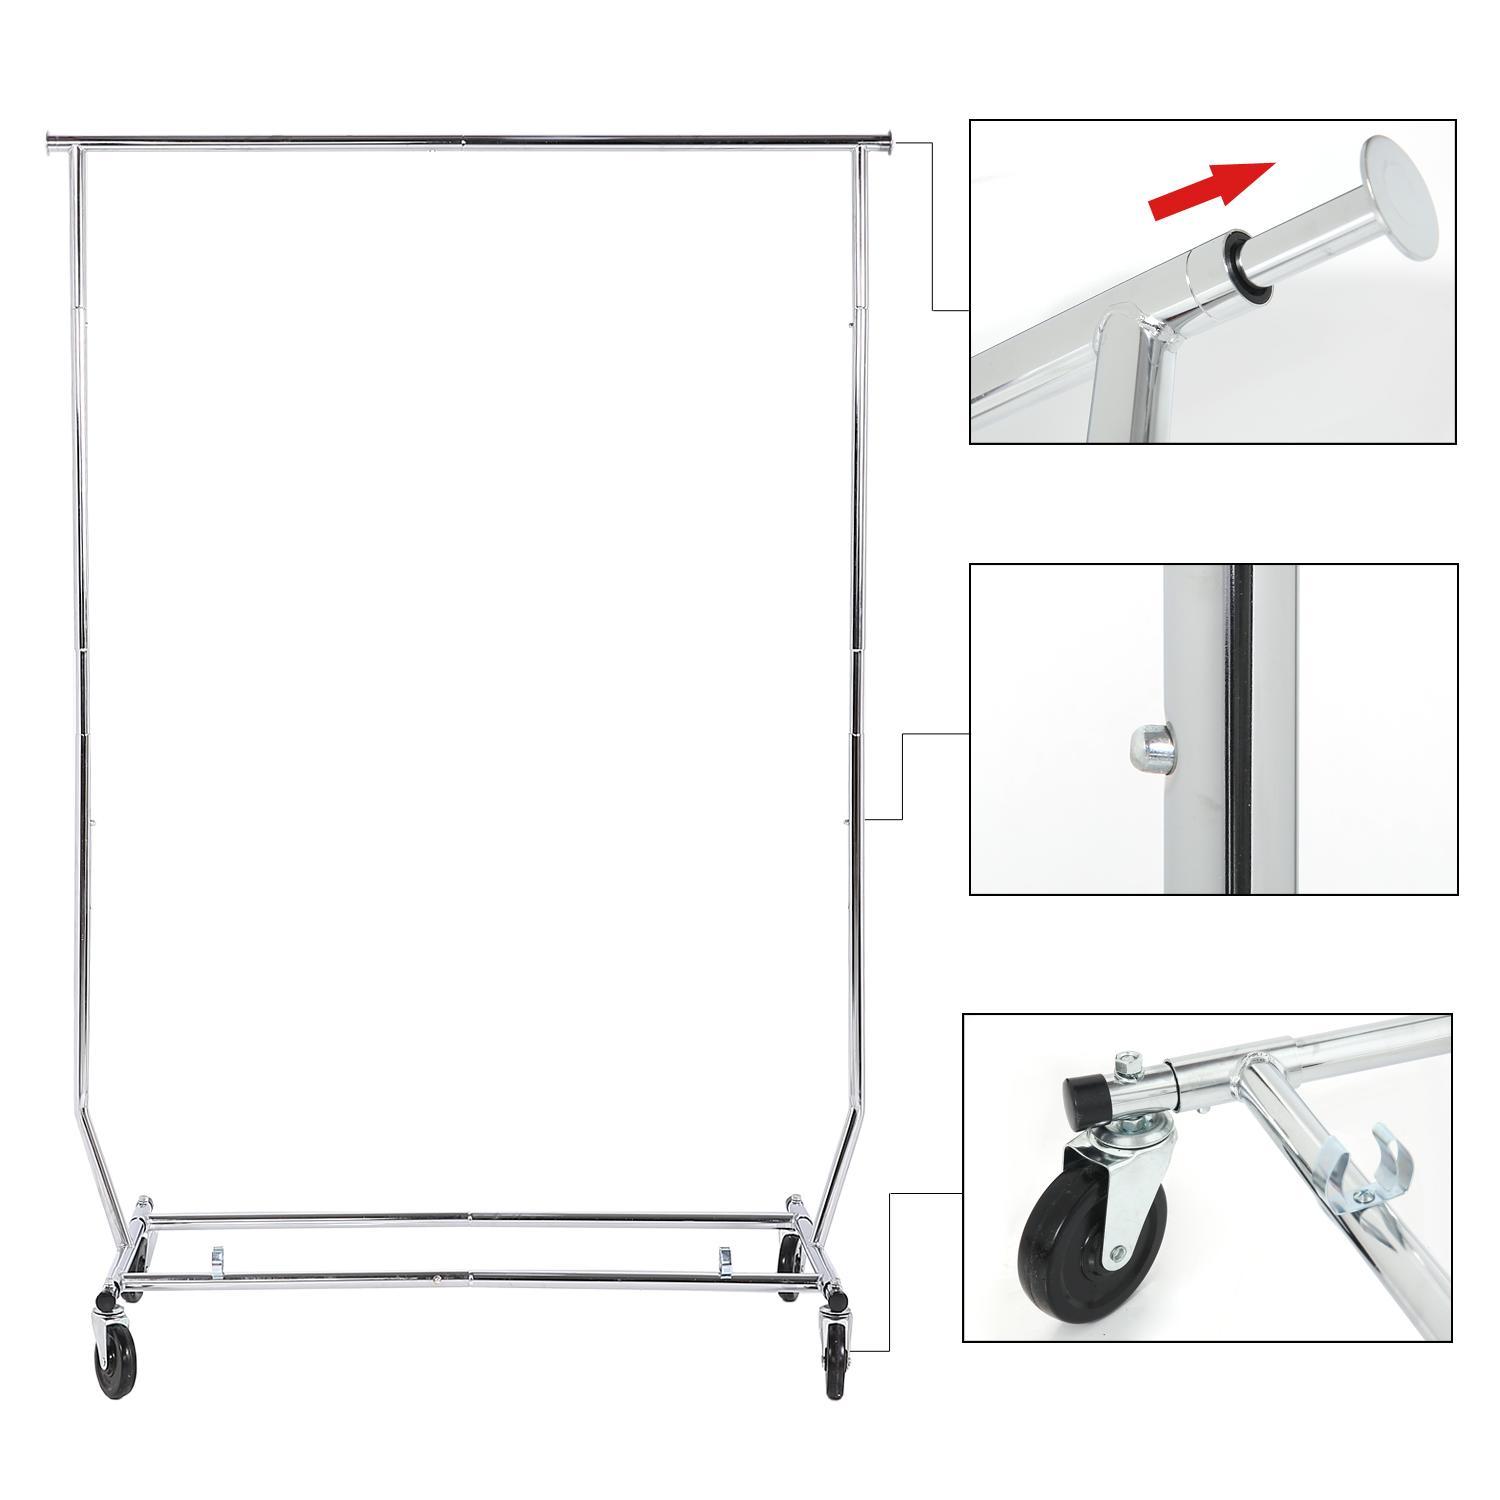 Whitmor Adjustable Rolling Garment Rack - Collapsible - Chrome - 22" x 51" x 71.25" - image 3 of 7